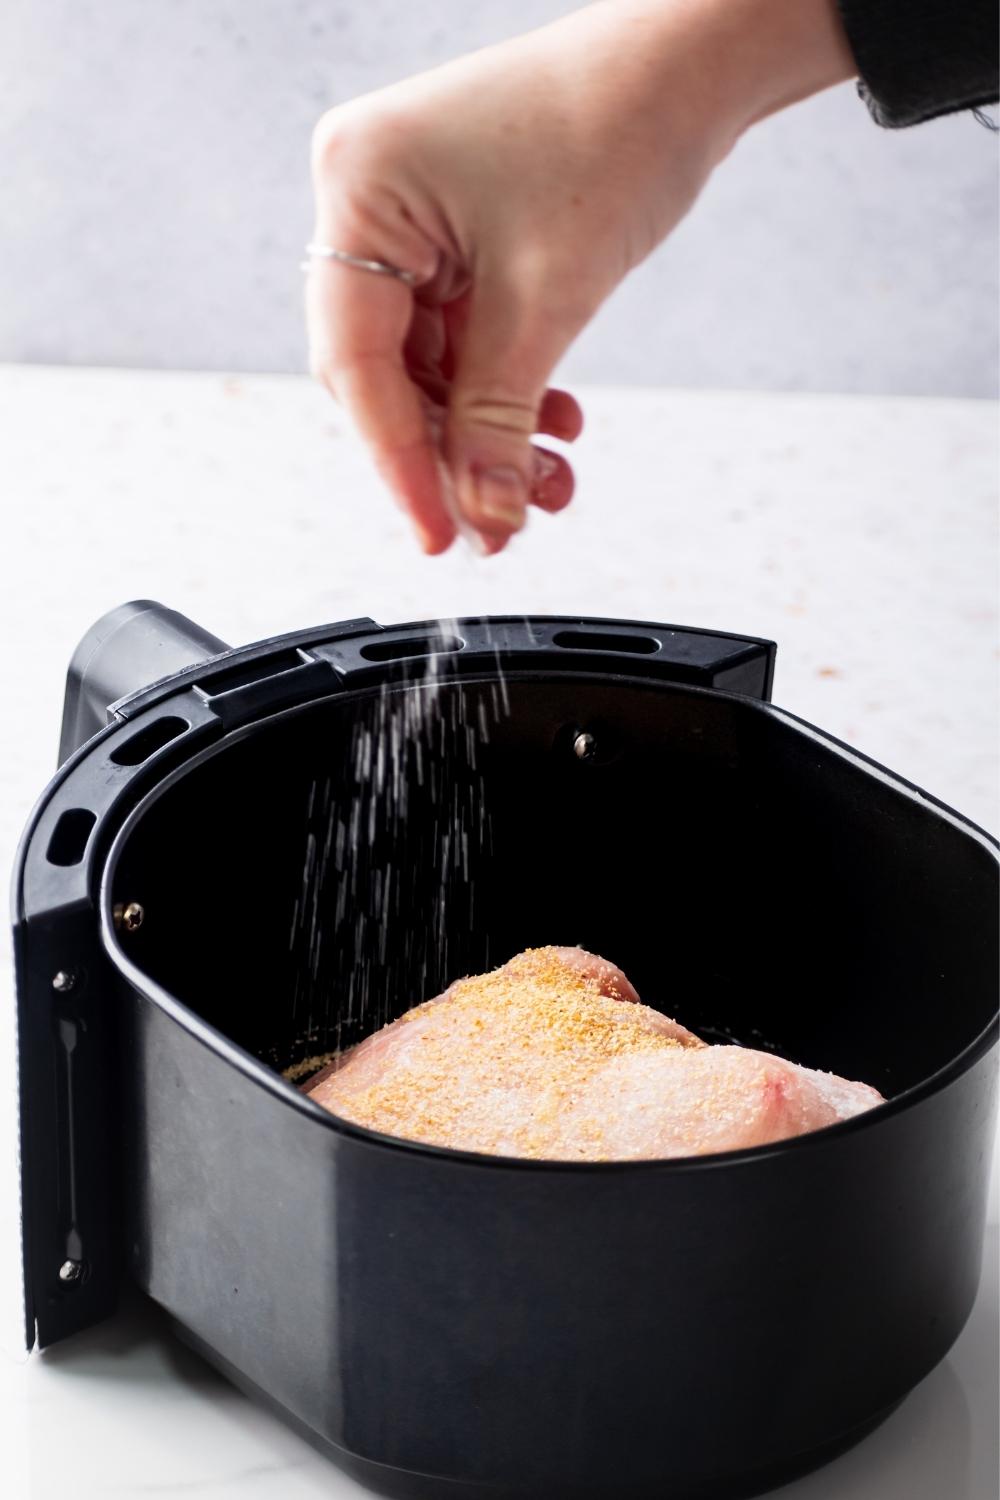 A hand sprinkling seasoning on top of a frozen chicken breast that is in an air fryer.